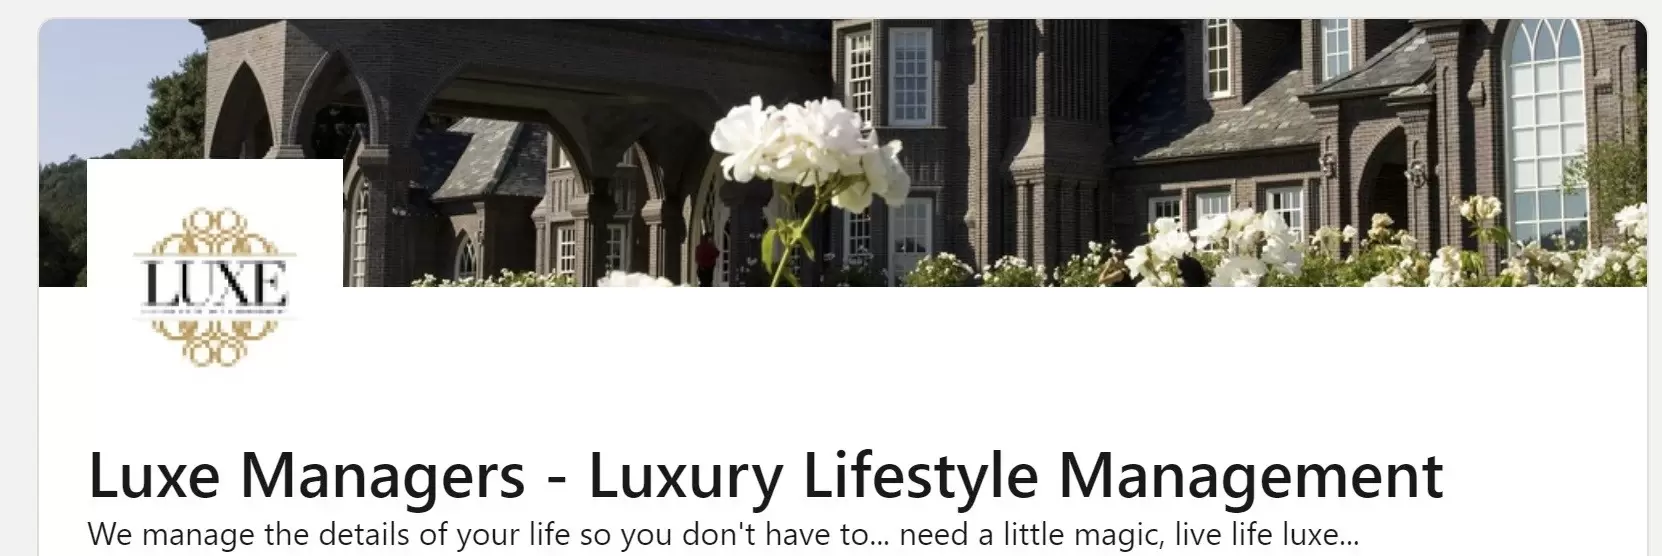 Luxe Managers on LinkedIn